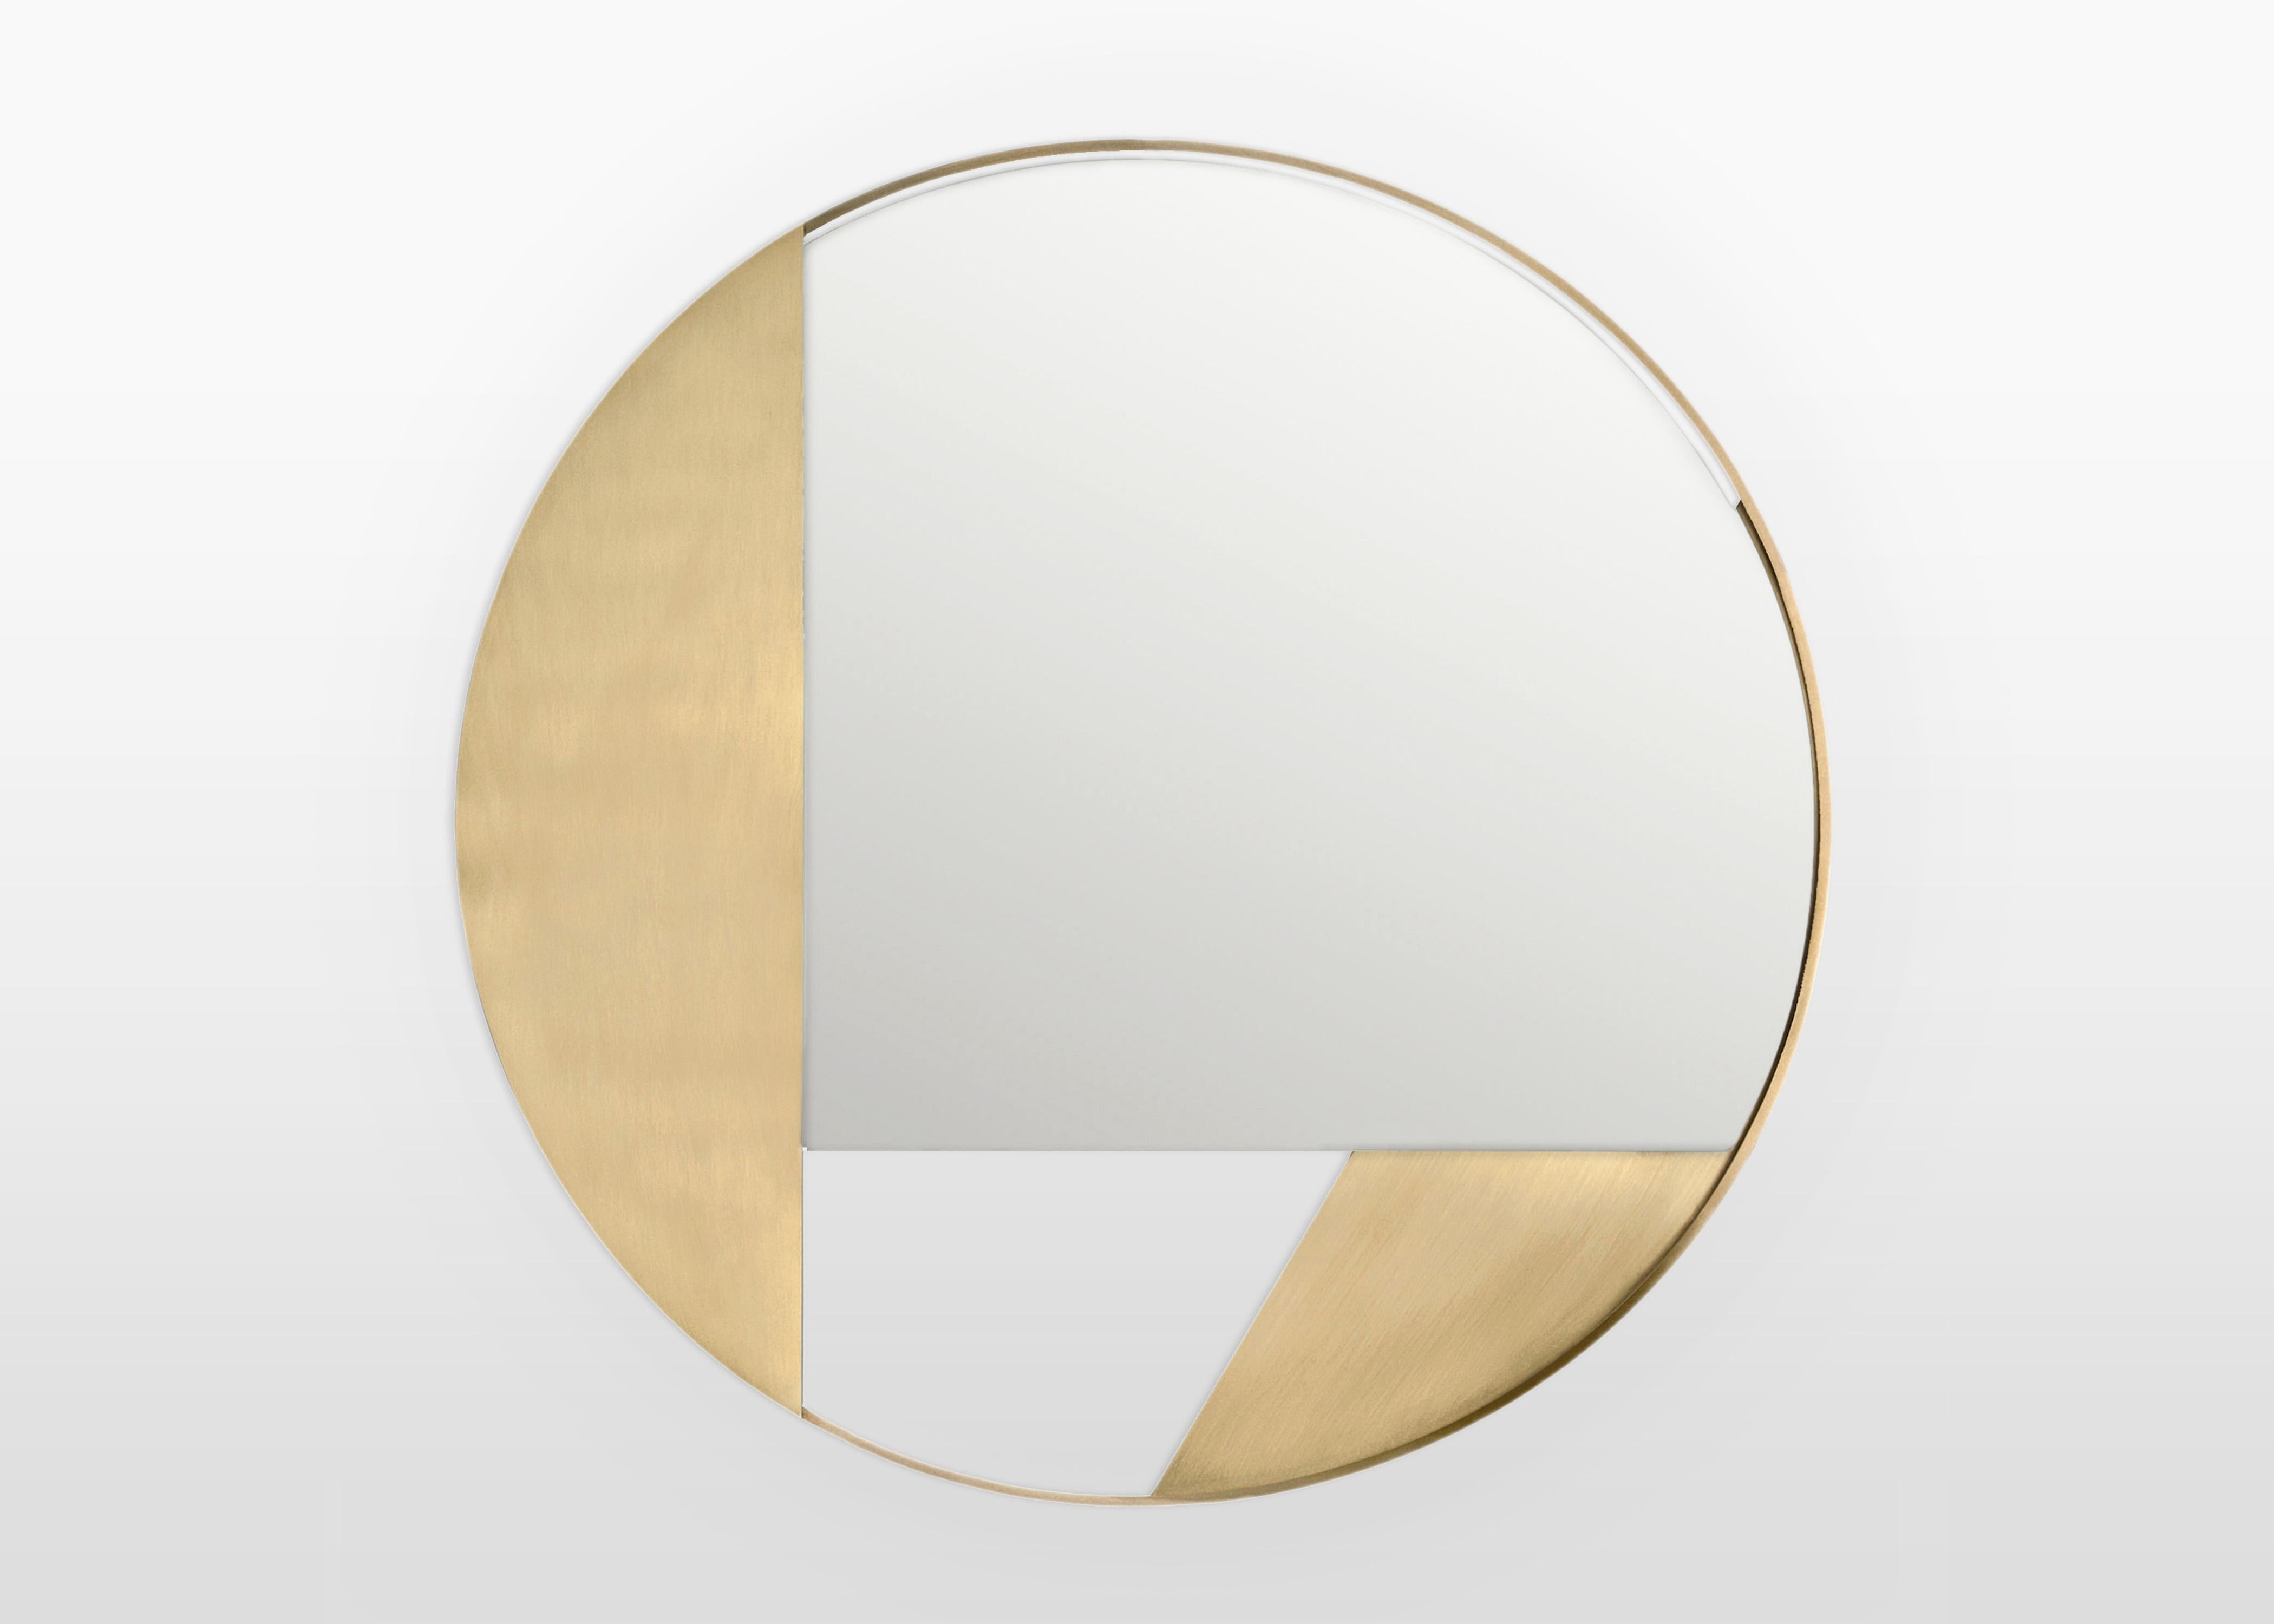 Edition mirror by Edizione Limitata
Limited Edition of 1000 pieces. Signed and numbered.
Designers: Simone Fanciullacci
Dimensions: D 4 x Ø 90 cm.
Materials: Brushed brass, mirror

Edizione Limitata, that is to say “Limited Edition”, is a brand